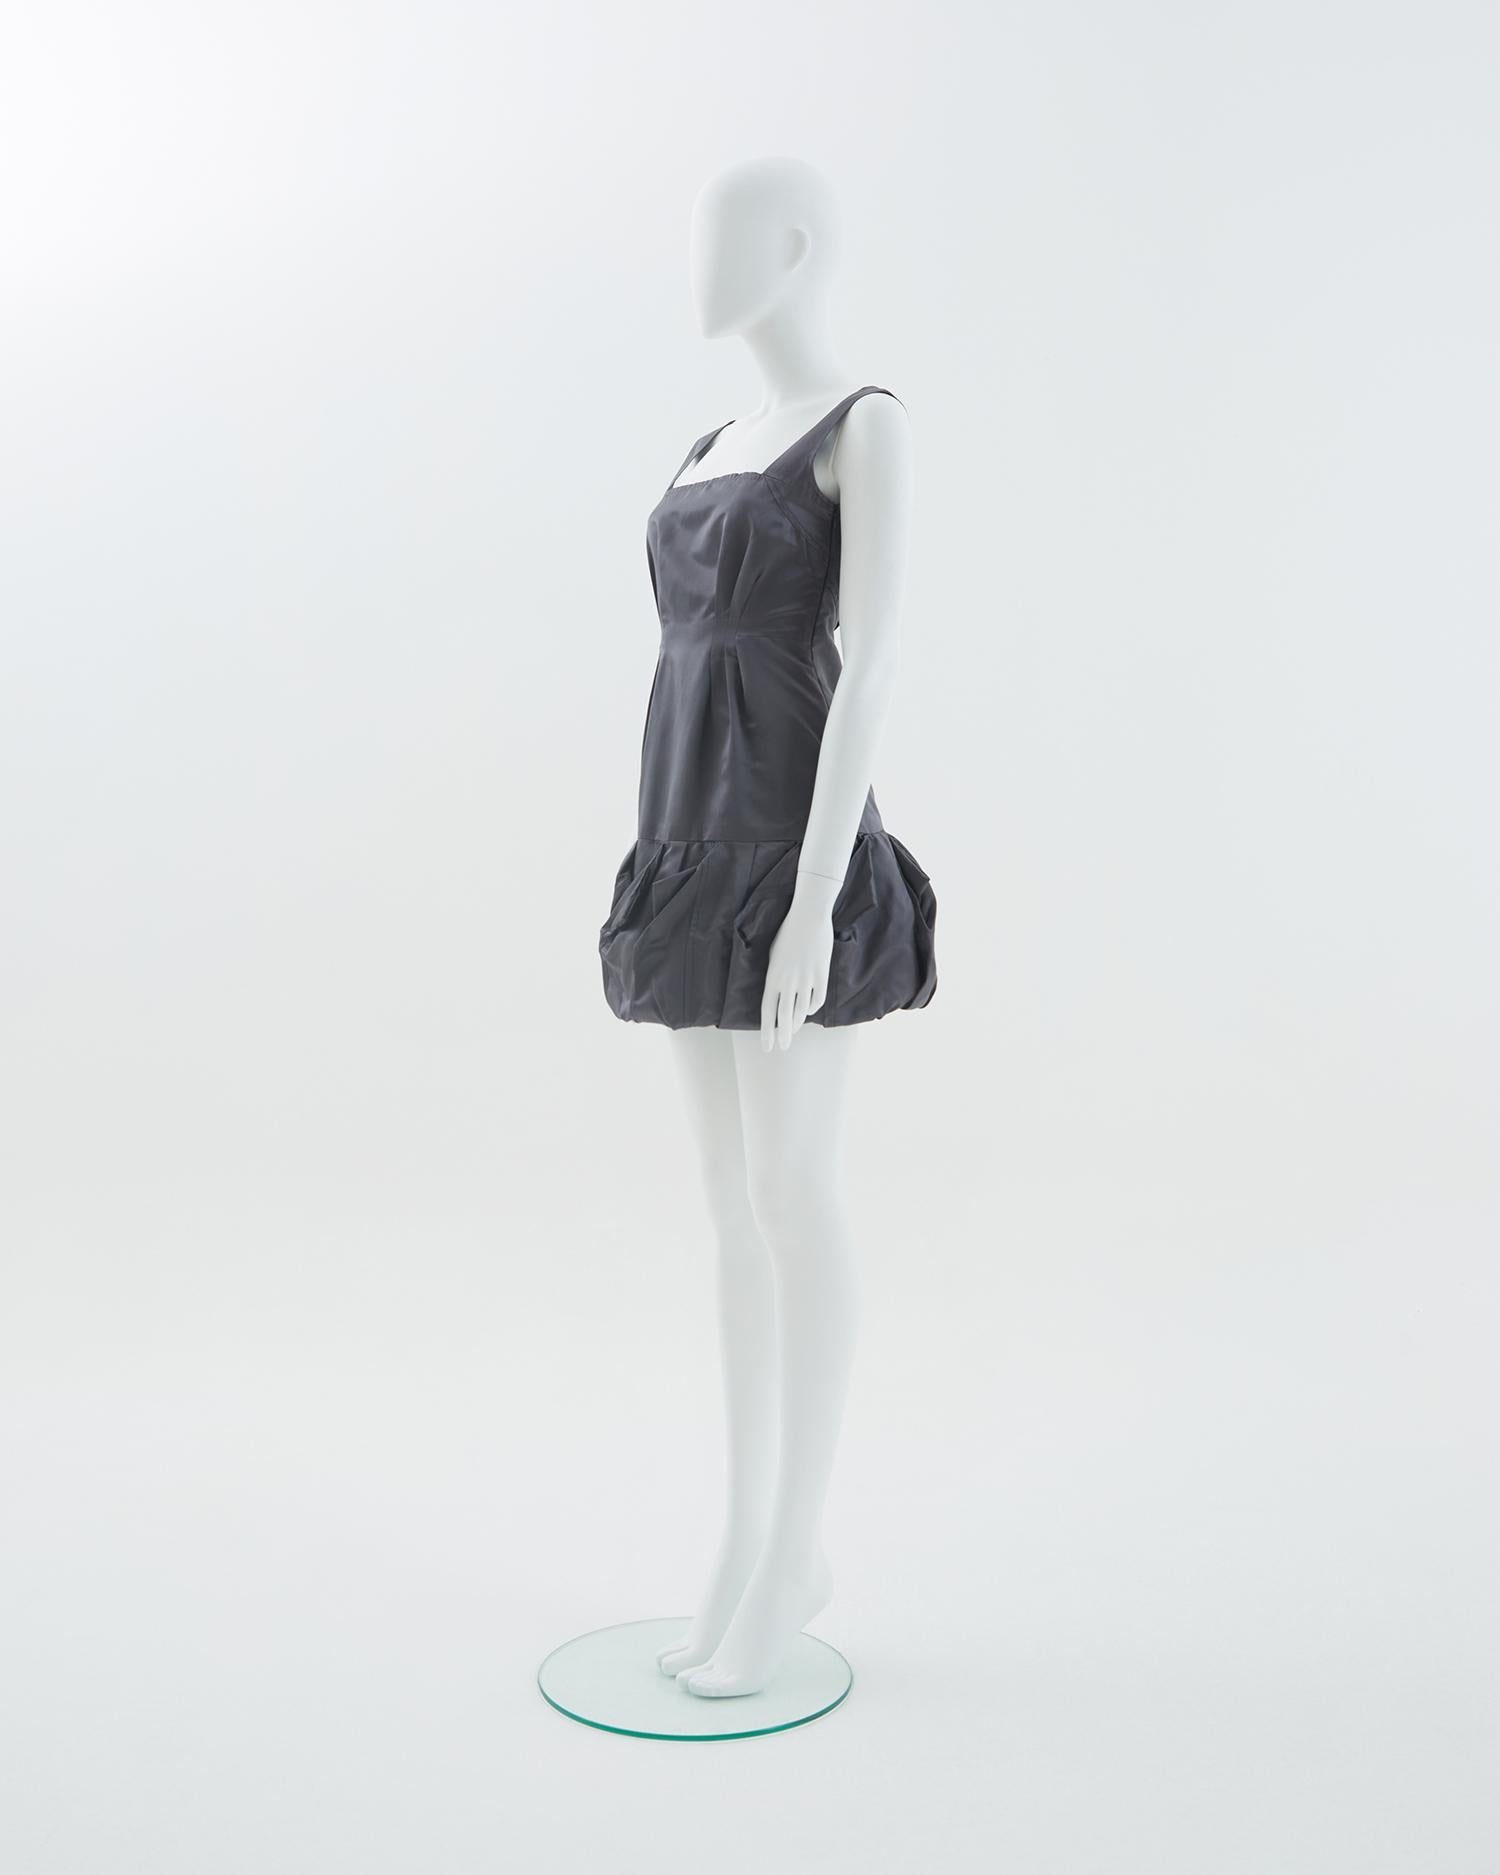 - Spring Summer 2007
- Sold by Skof.Archive
- Designed by Miuccia Prada
- Dark gray silk cocktail dress
- Sleveless
- Hidden side zipper closure 
- Ruffled detail on the bottom
- Made in Italy

Condition: Excellent Wear consistent with age and use.